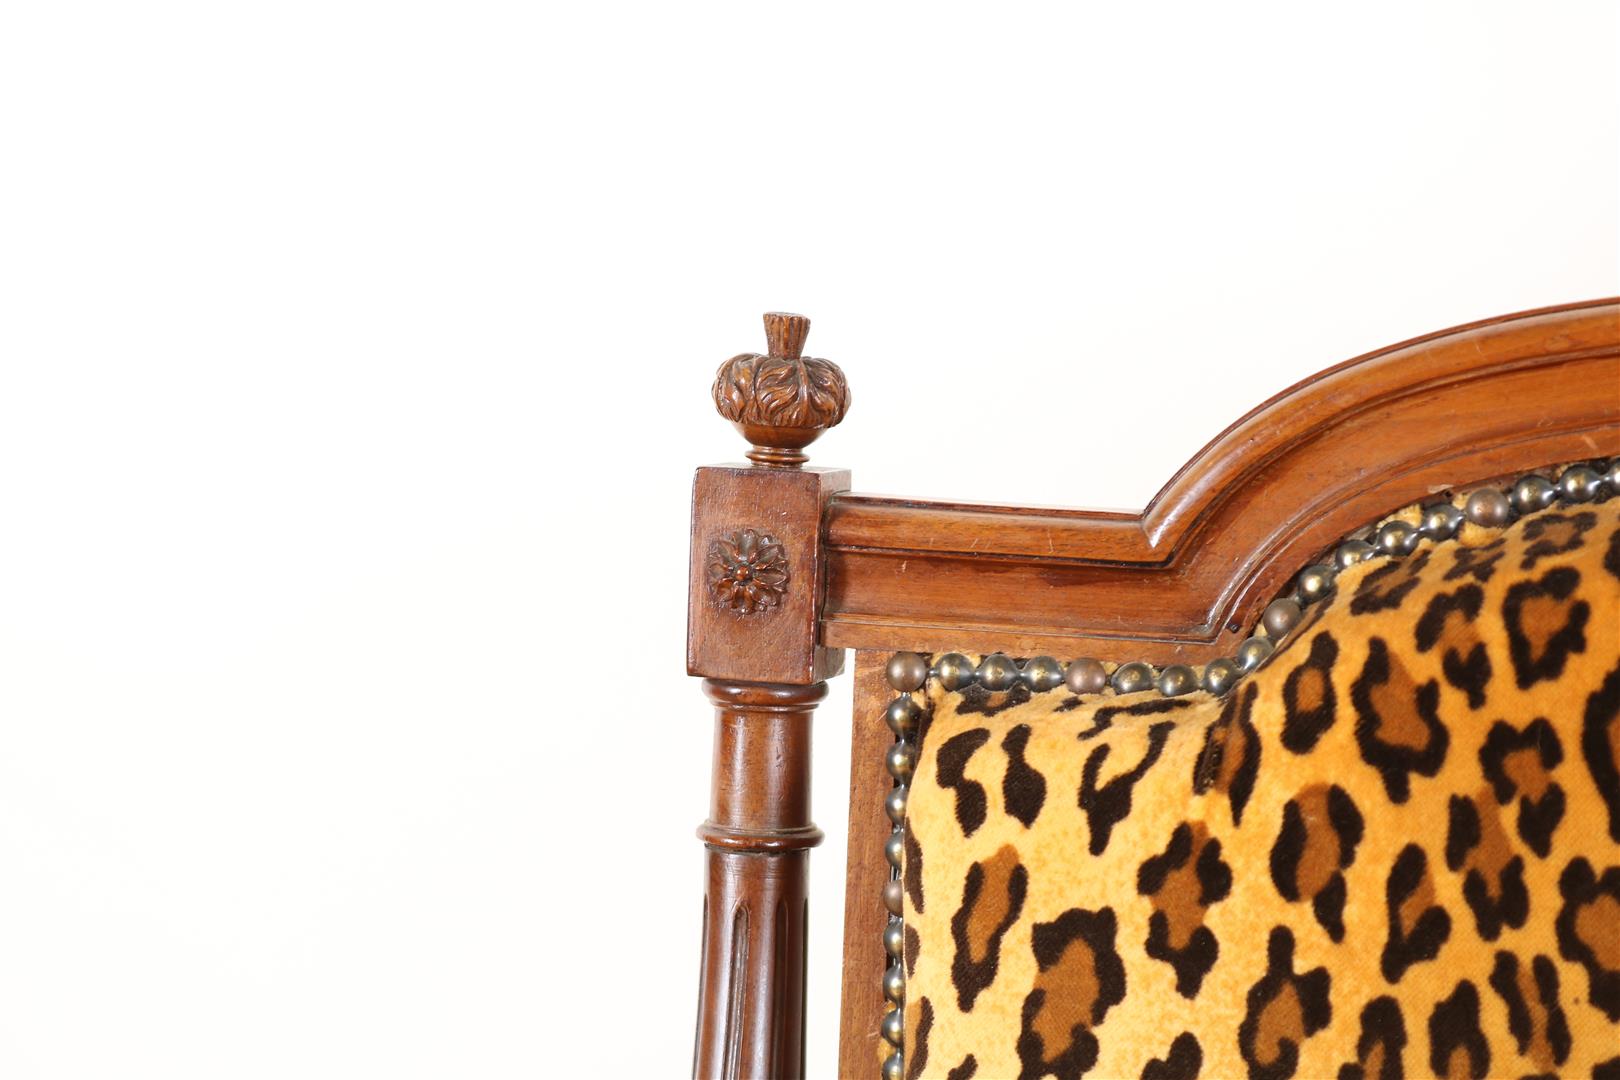 Walnut Louis XVI style double sofa with bow crown and leopard fabric upholstery, 103 x 130 x 58 cm. - Image 3 of 5